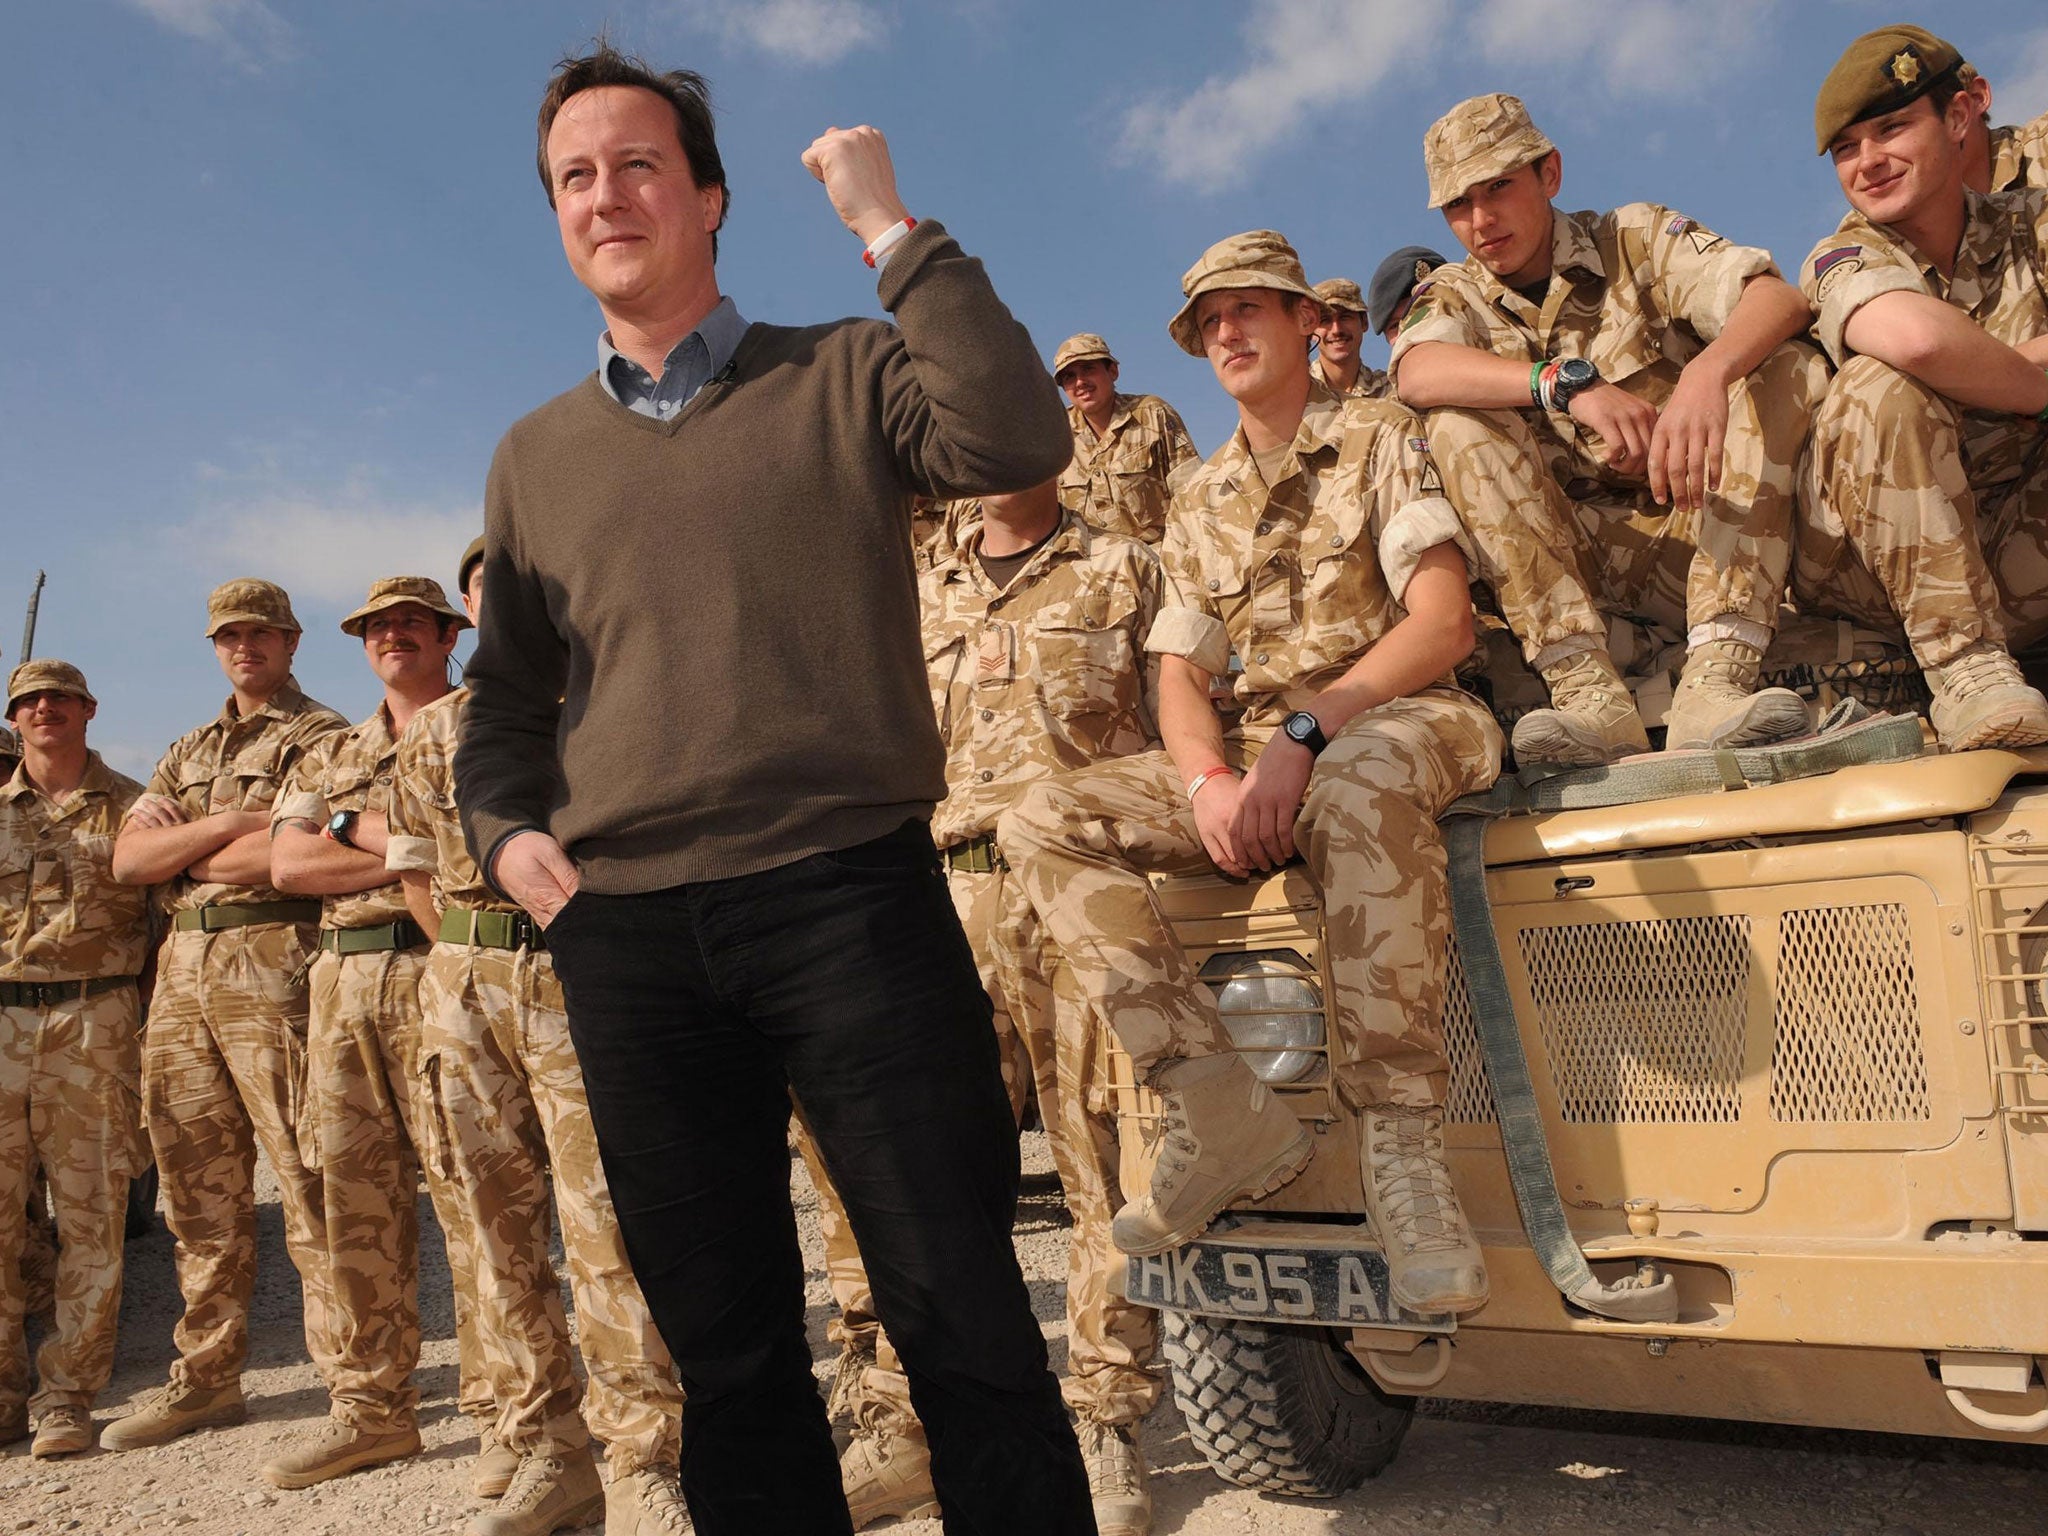 File: David Cameron meets British soldiers at the Task Force Helmand HQ in Lashkar Gah, Afghanistan in 2009